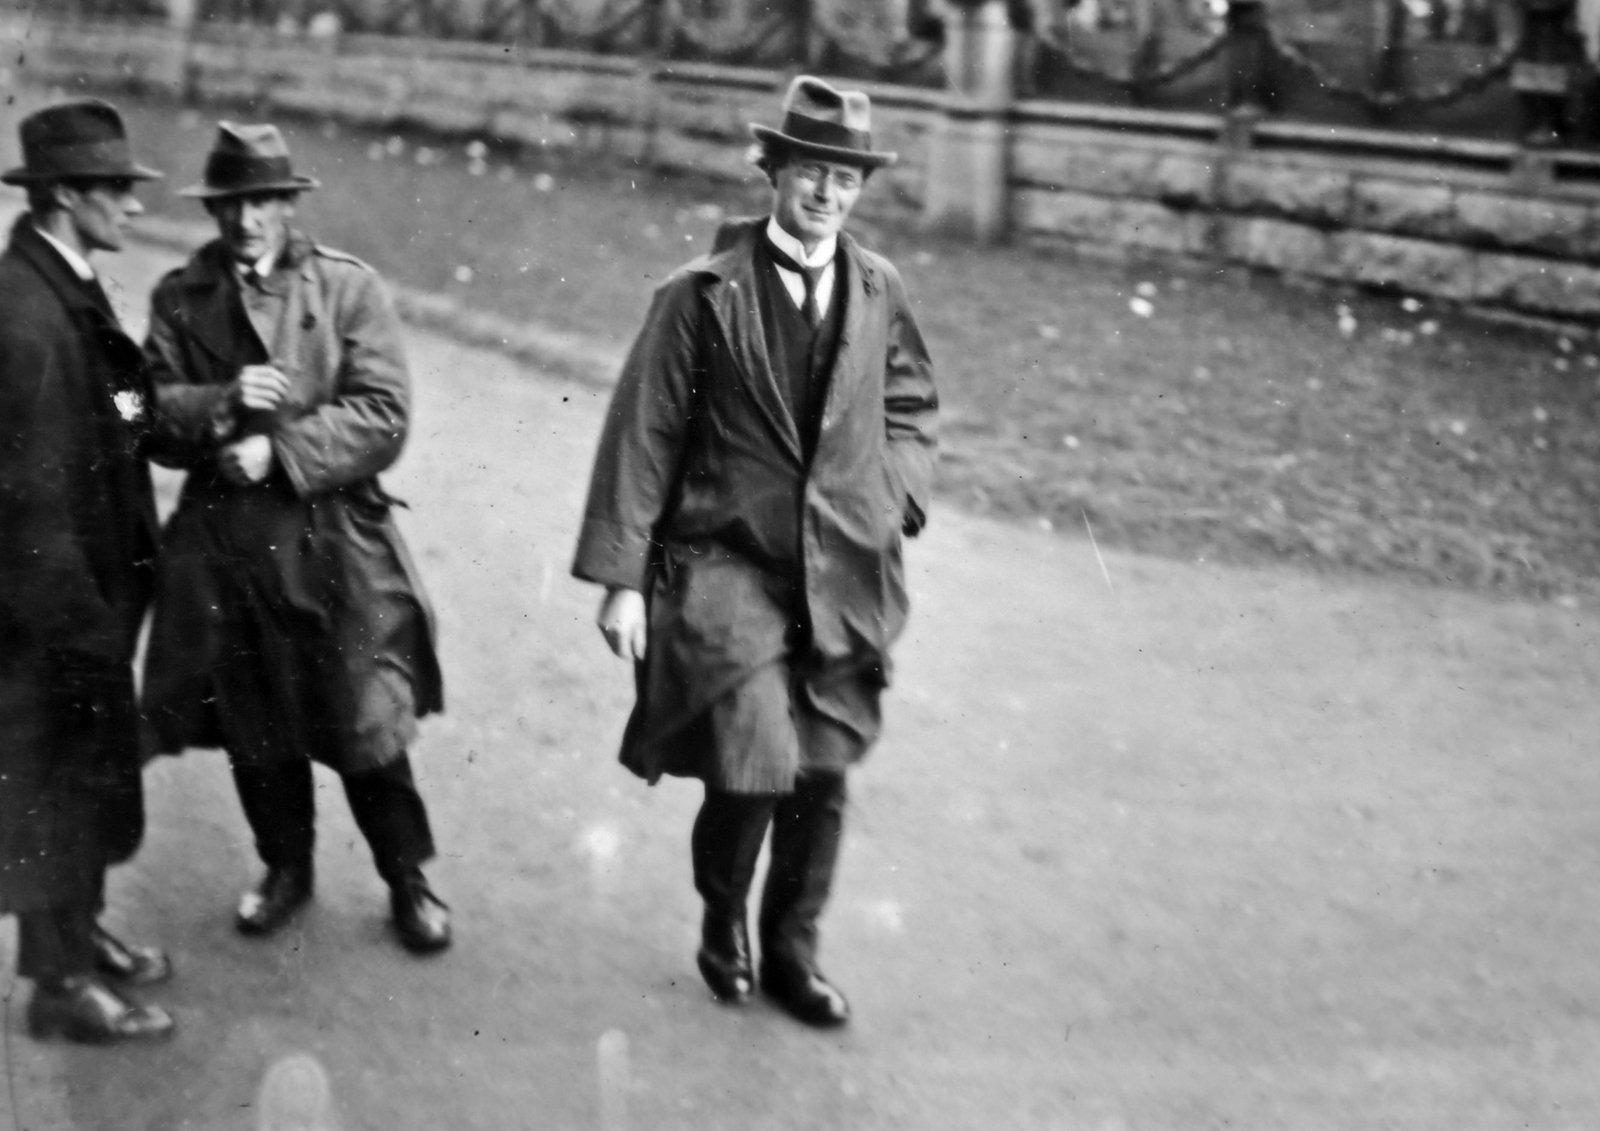 Image - Ceann Comhairle Eoin MacNeill arriving on the day of the vote on ratification. He would have the casting vote, in the event of a tie. Credit: Getty Images